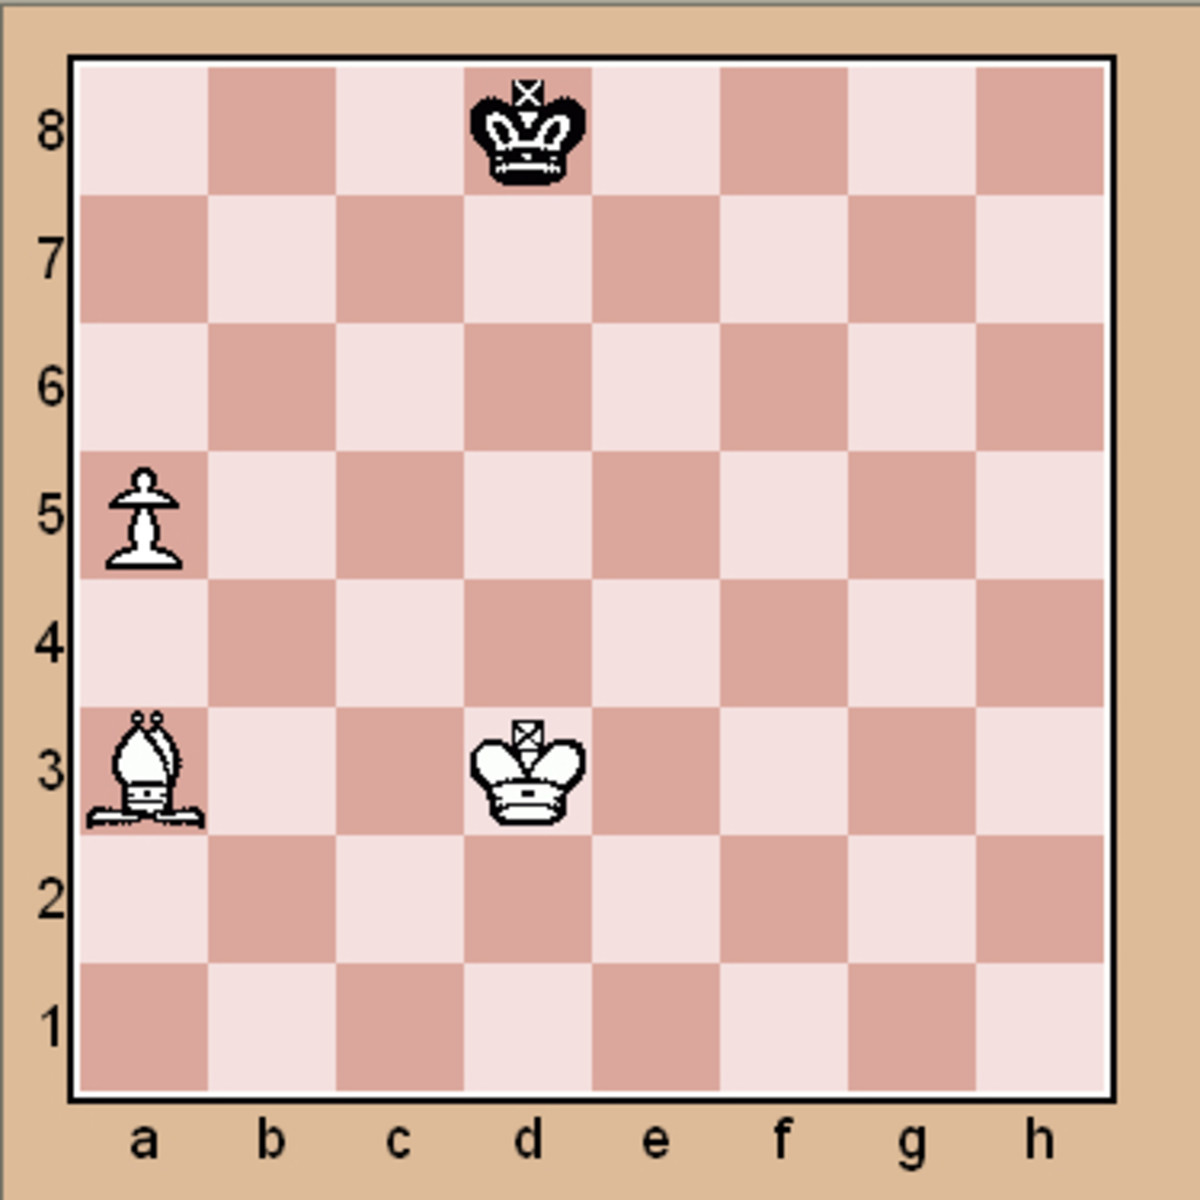 Mate in 1 Chess Puzzles - HubPages